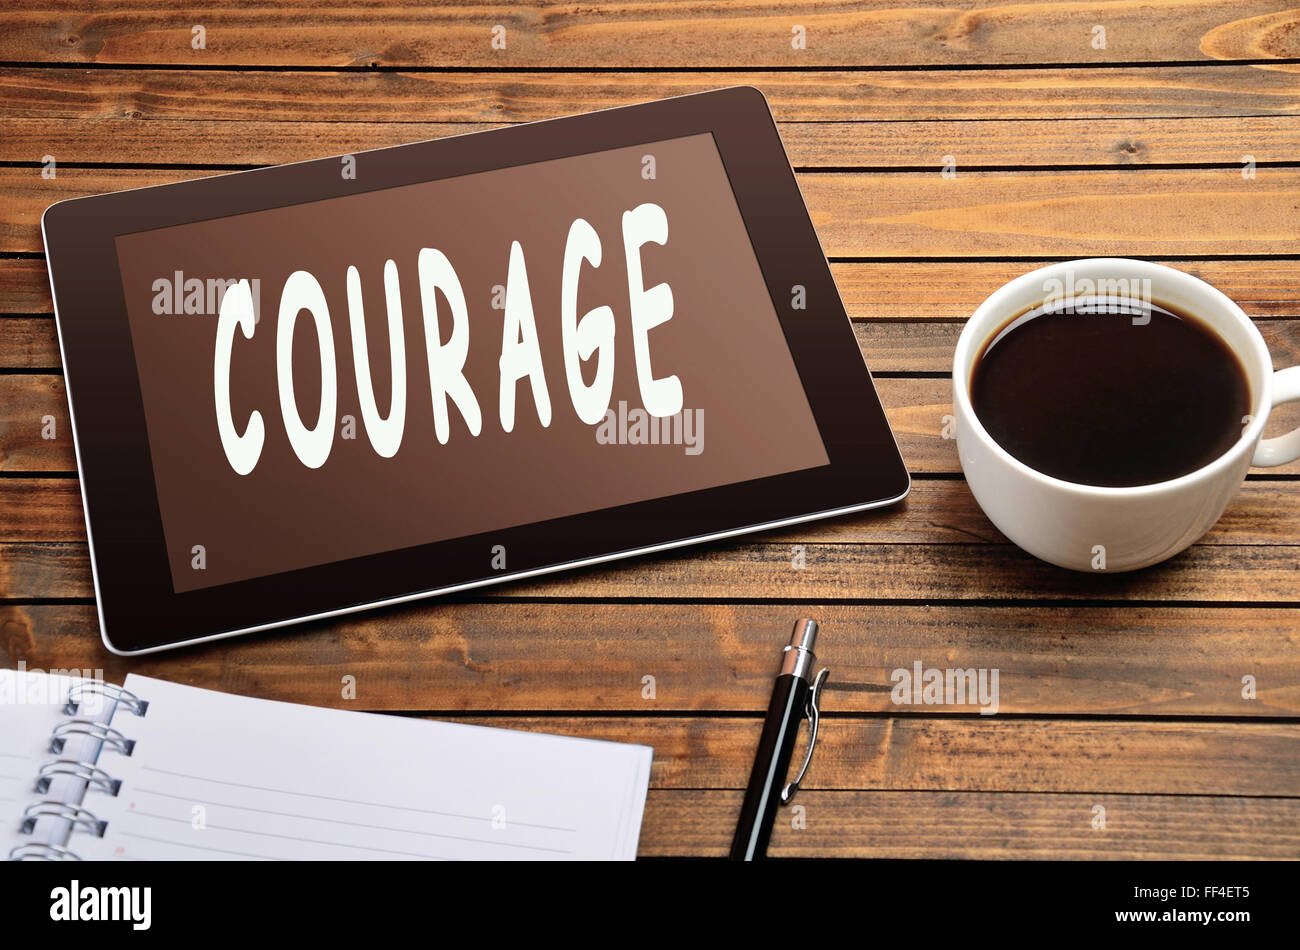 Courage word on digital tablet Stock Photo